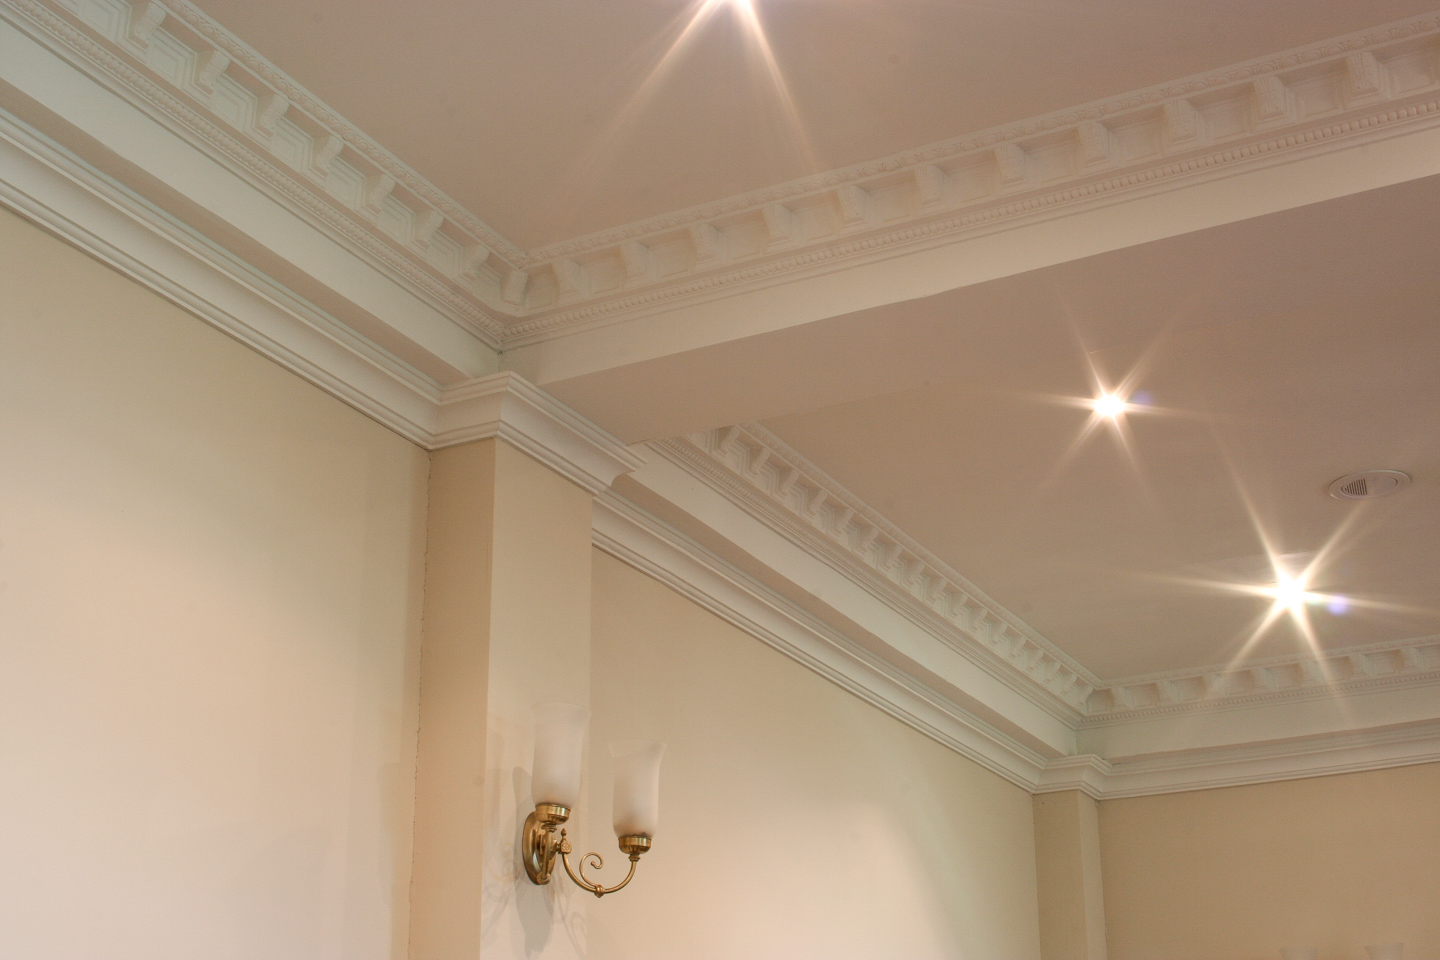 All new pilasters, beams and mouldings in the conference room.